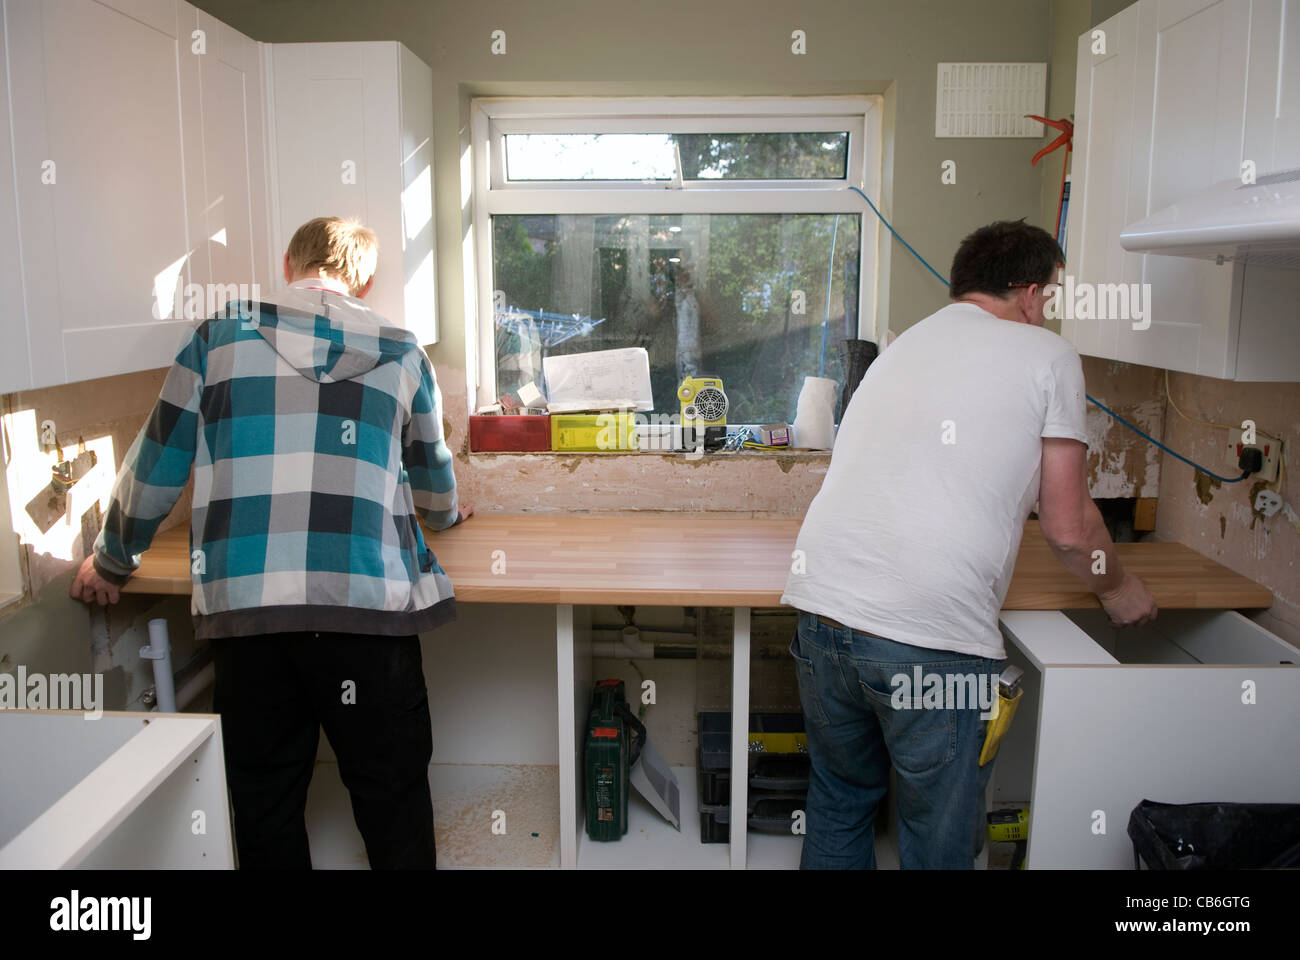 Tradesman (right) and his assistant positioning worktop in new kitchen installation in residential home, Bordon, Hampshire, UK. Stock Photo